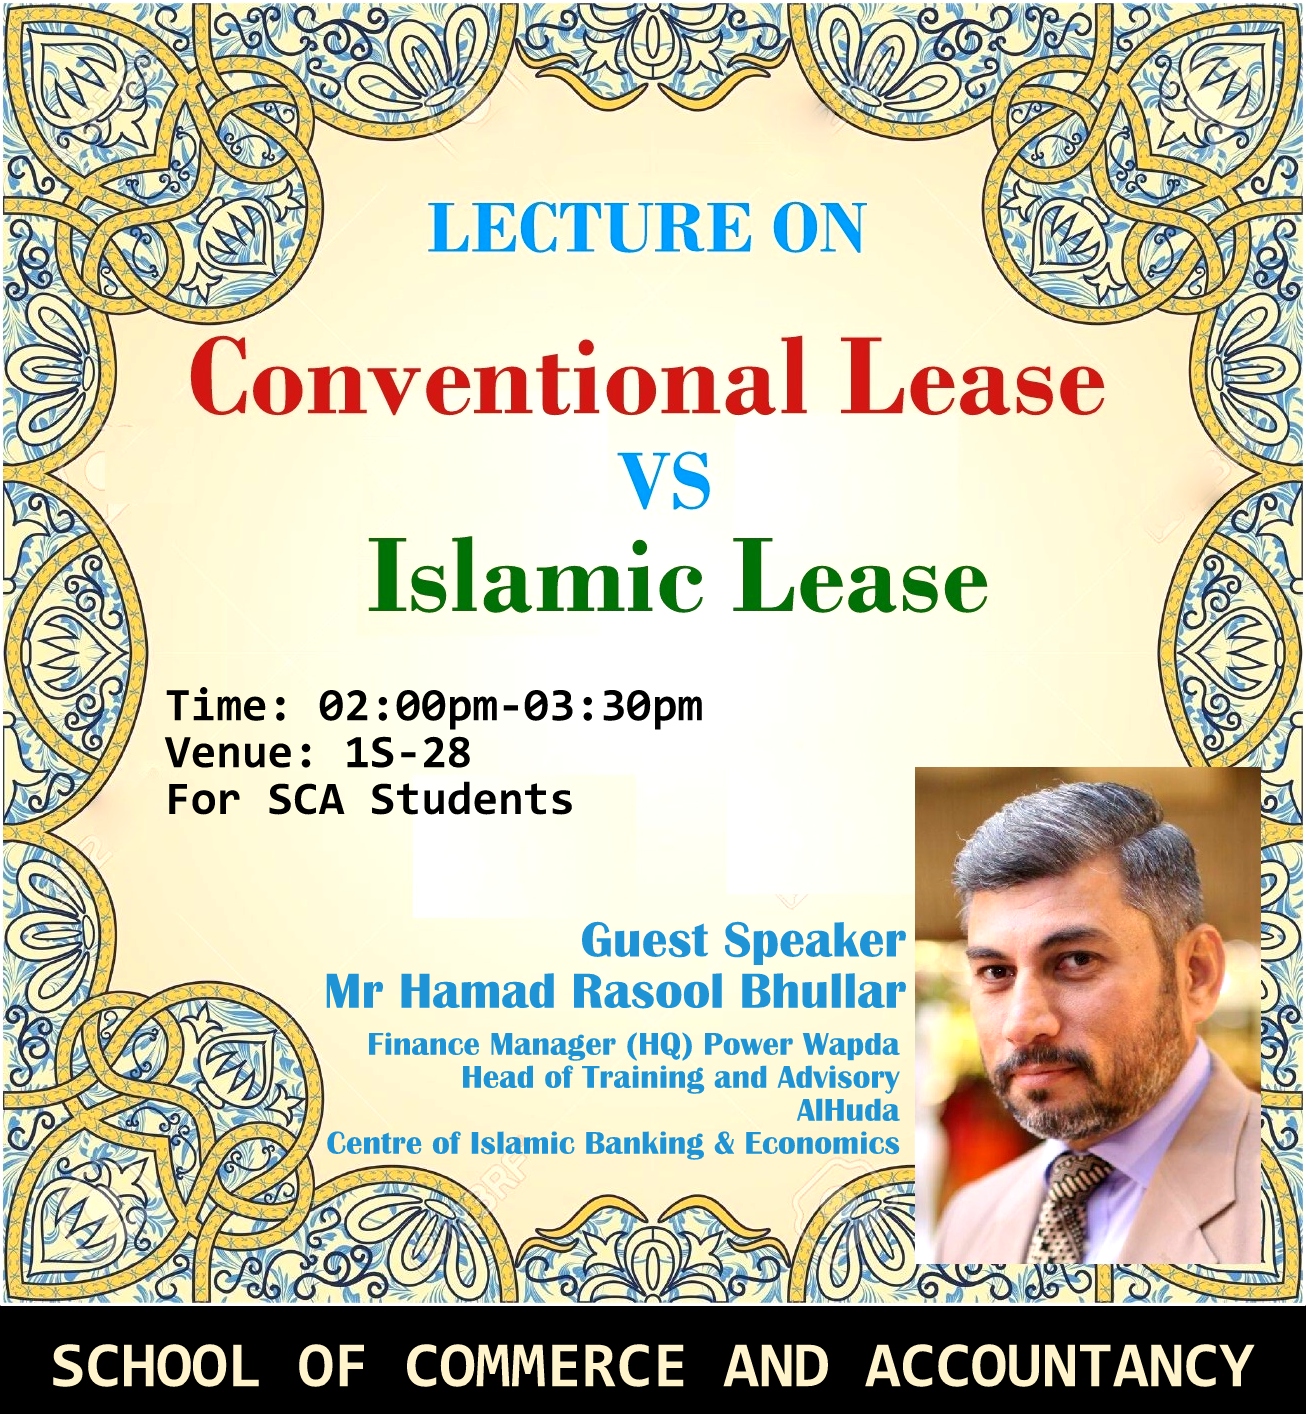 Conventional Lease and Islamic Lease